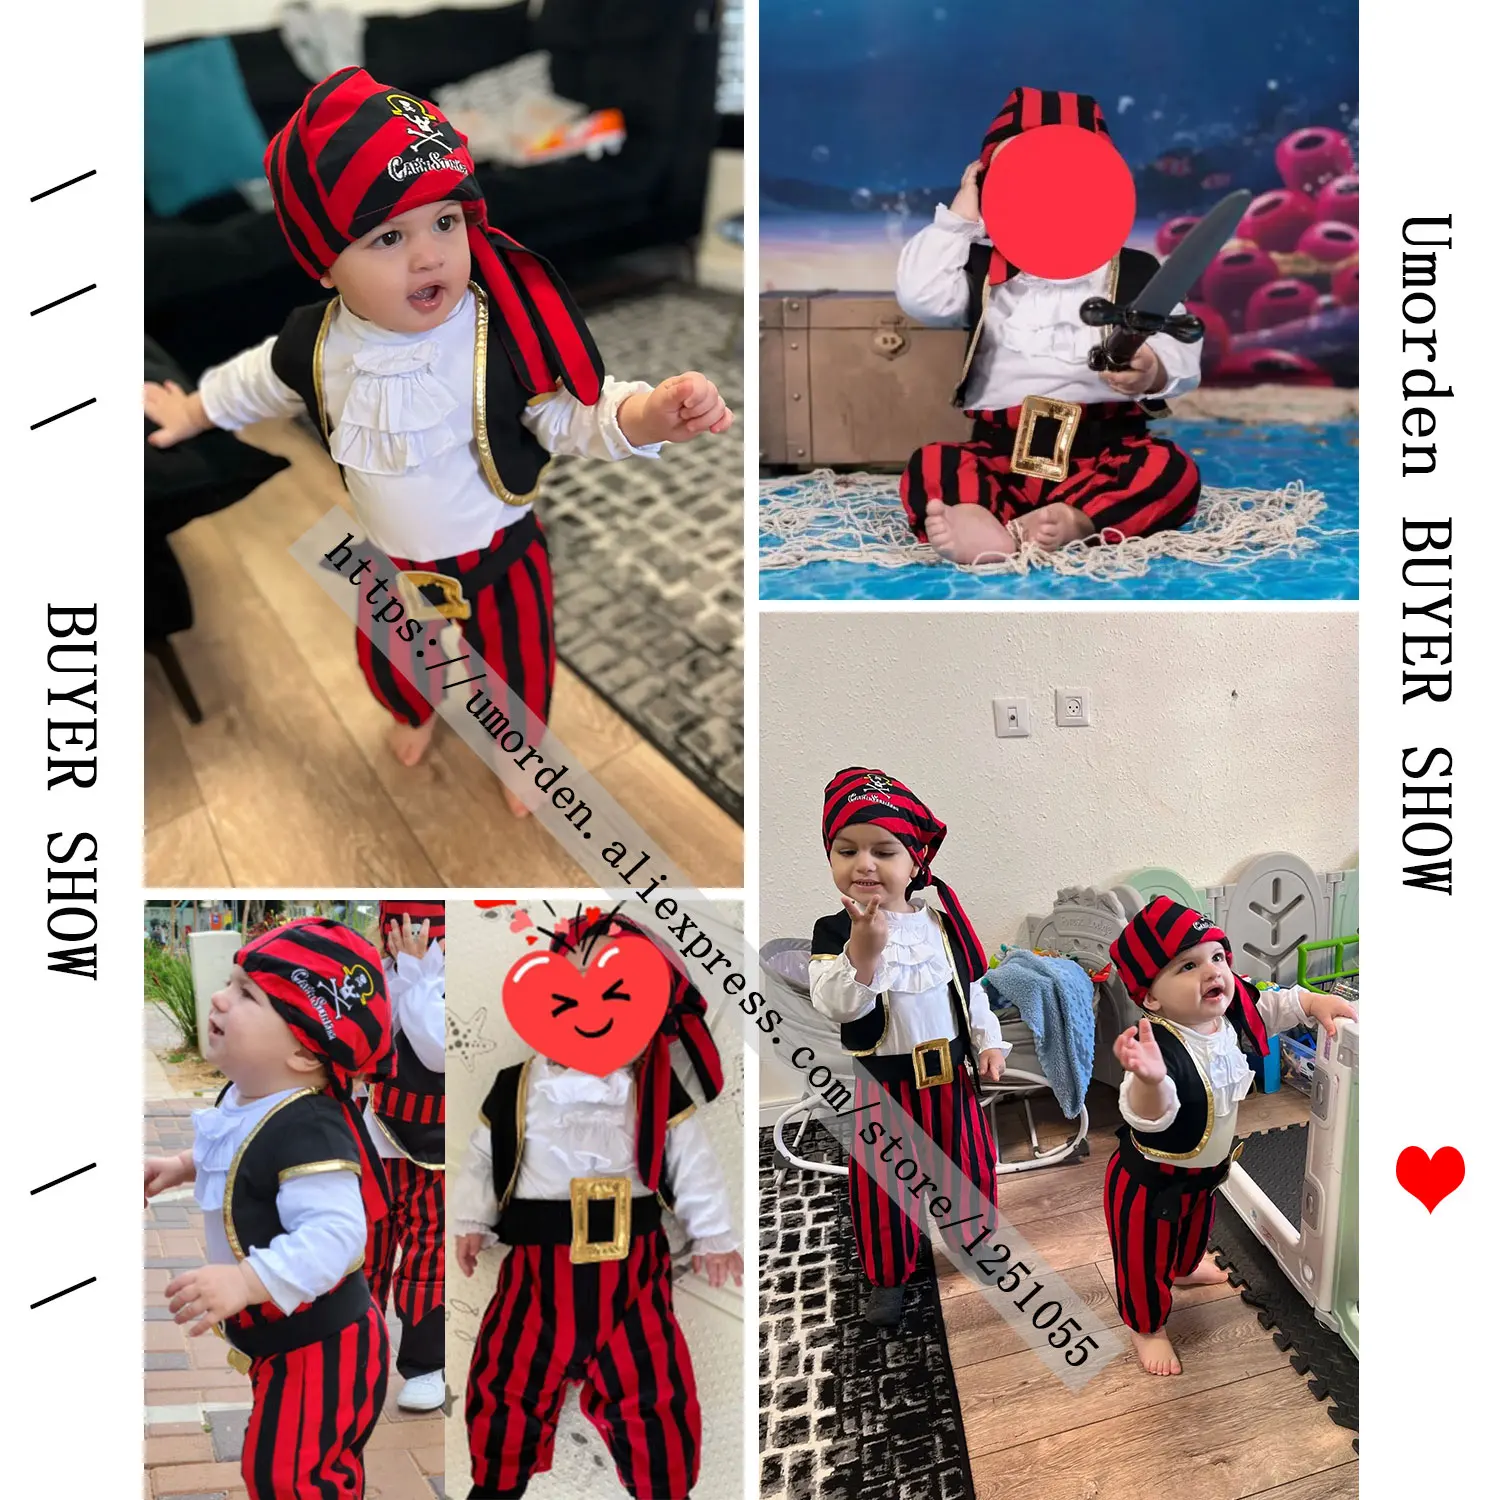 Umorden Pirate Captain Costume for Baby Boy Toddler Halloween Christmas Birthday Party Cosplay Fancy Dress